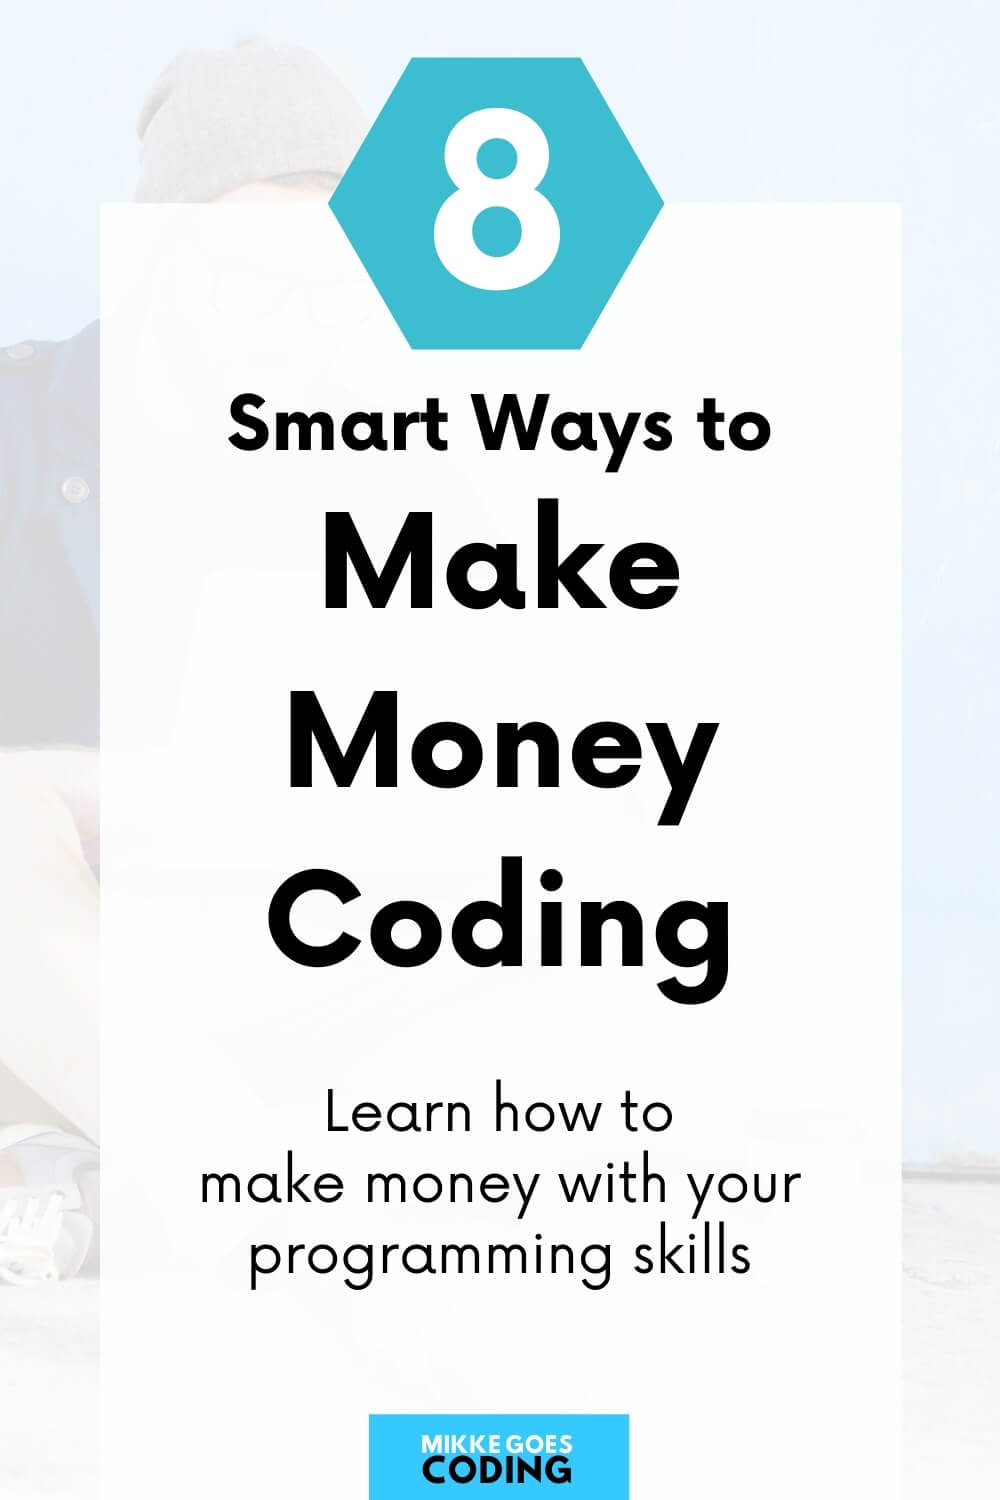 How to make money coding - Learn to code for beginners